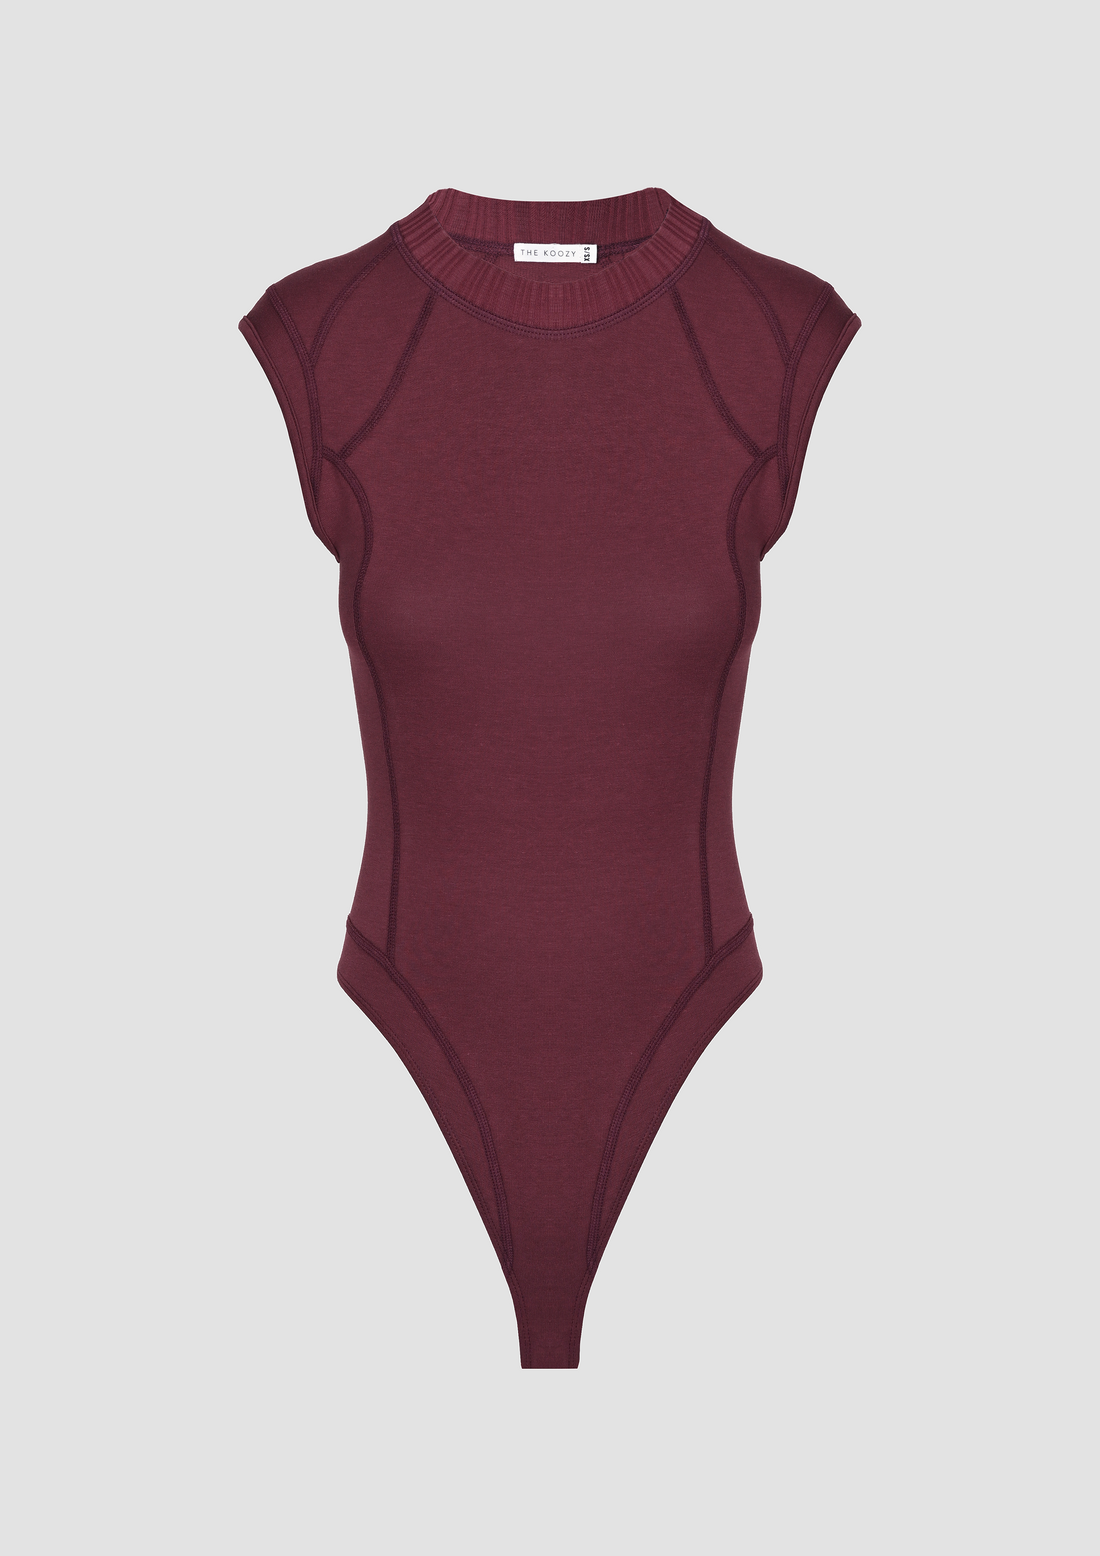 Amory Bodysuit in TENCEL™ Lyocell and Organic Cotton in Burgundy